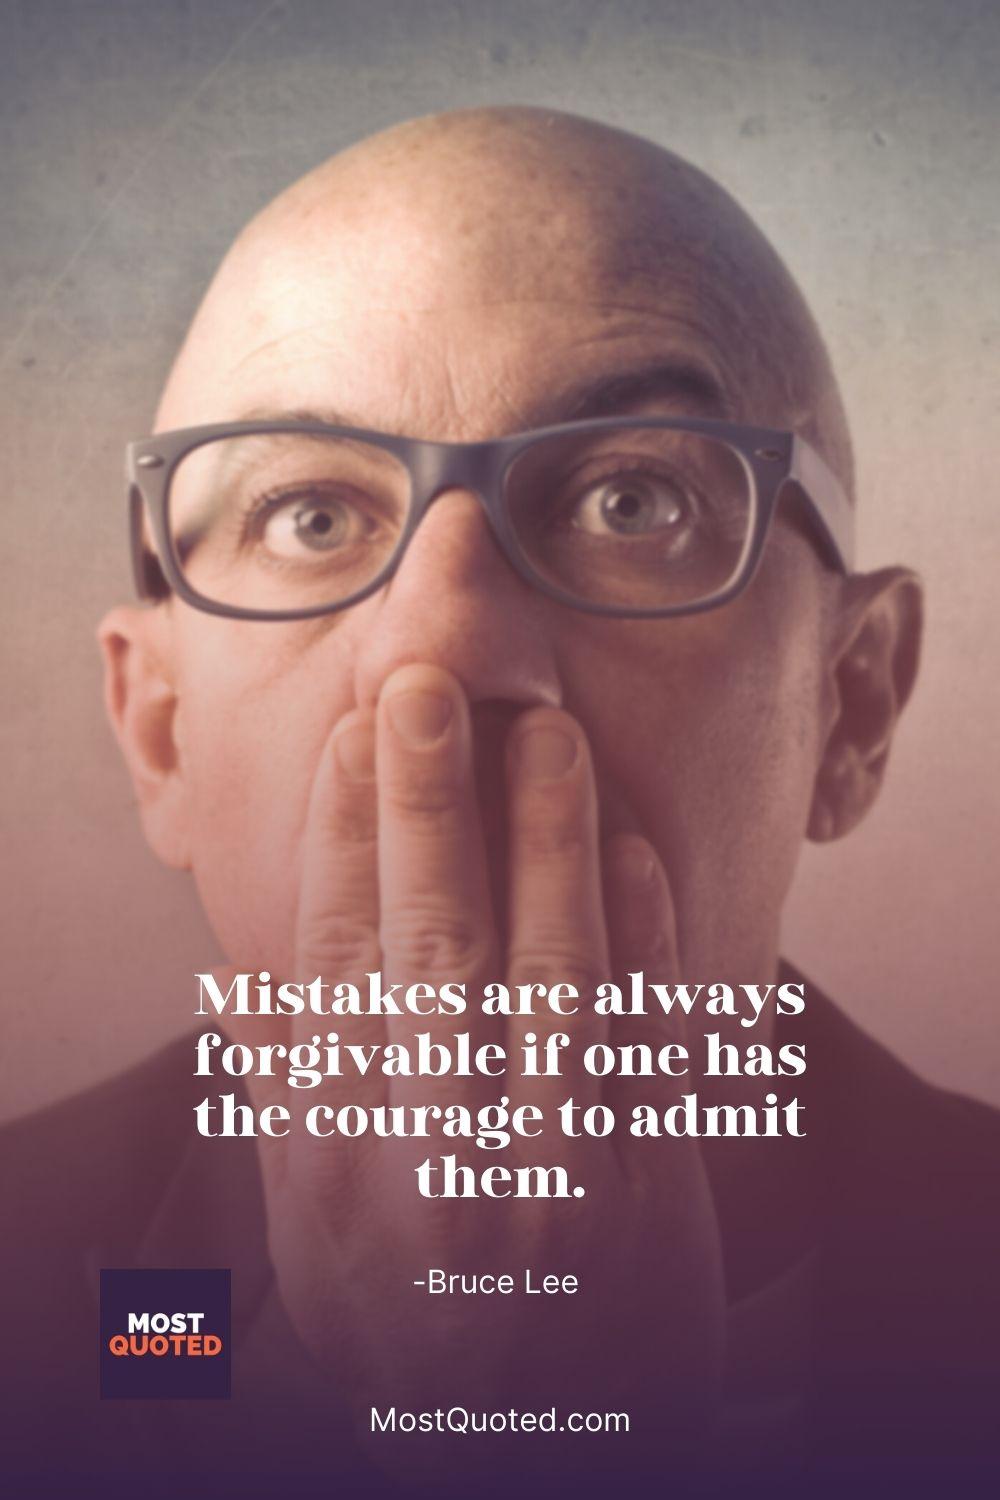 Mistakes are always forgivable if one has the courage to admit them. - Bruce Lee